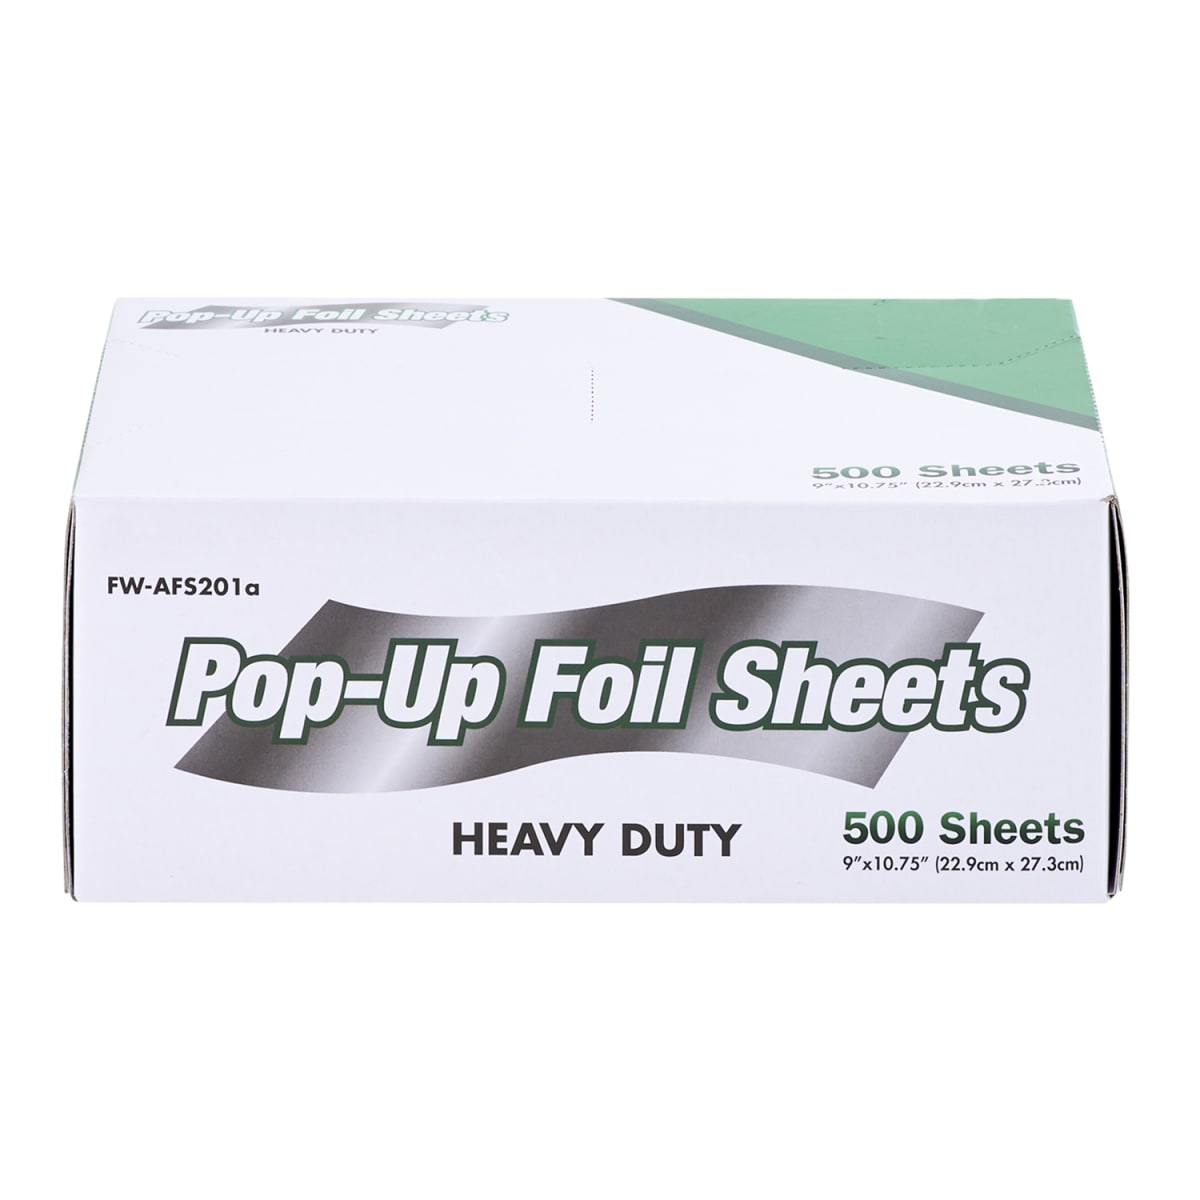 Choice 9 x 10 3/4 Food Service Interfolded Pop-Up Foil Sheets